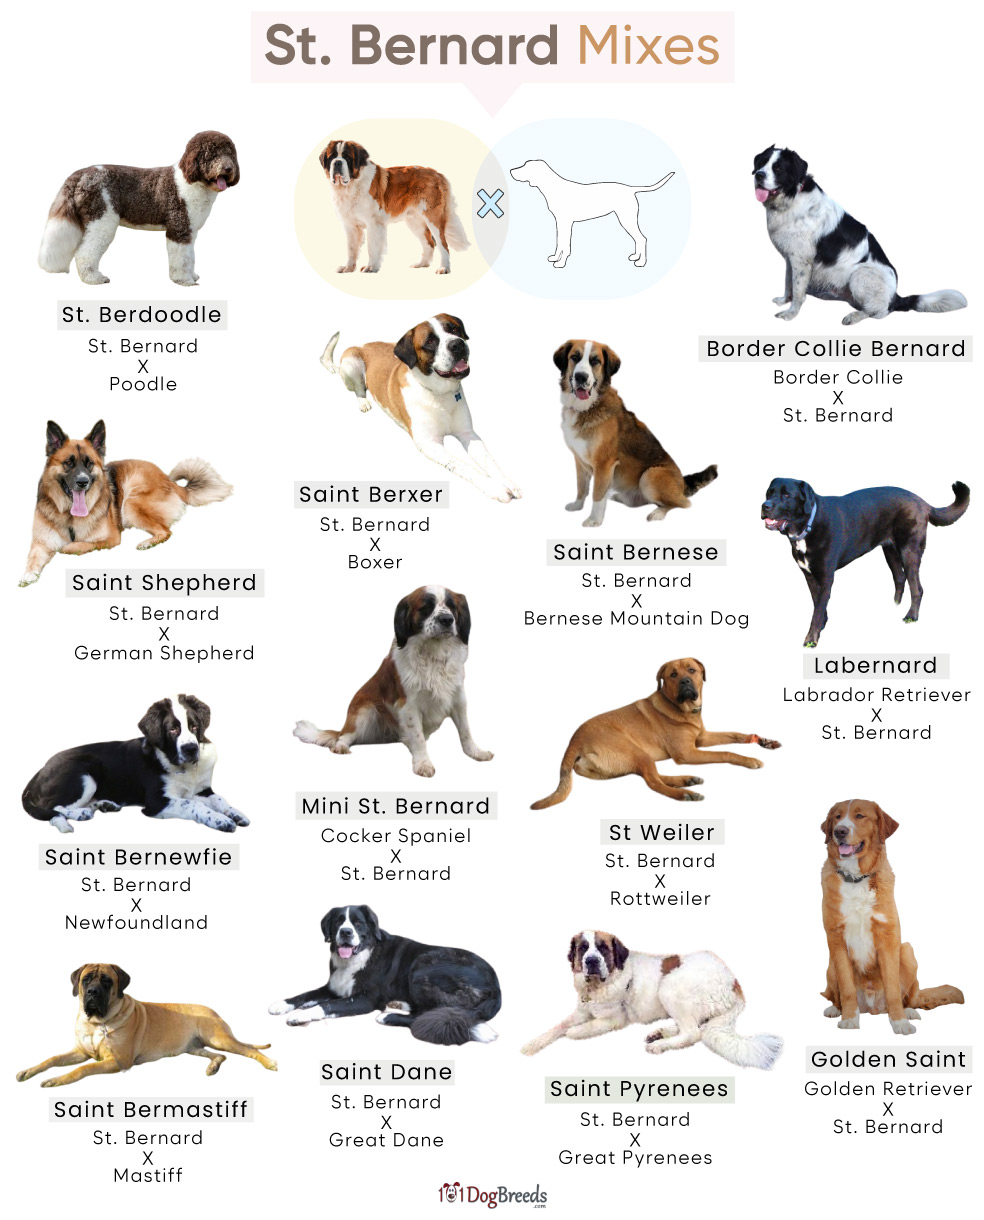 List of Popular St. Bernard Mixes With Pictures